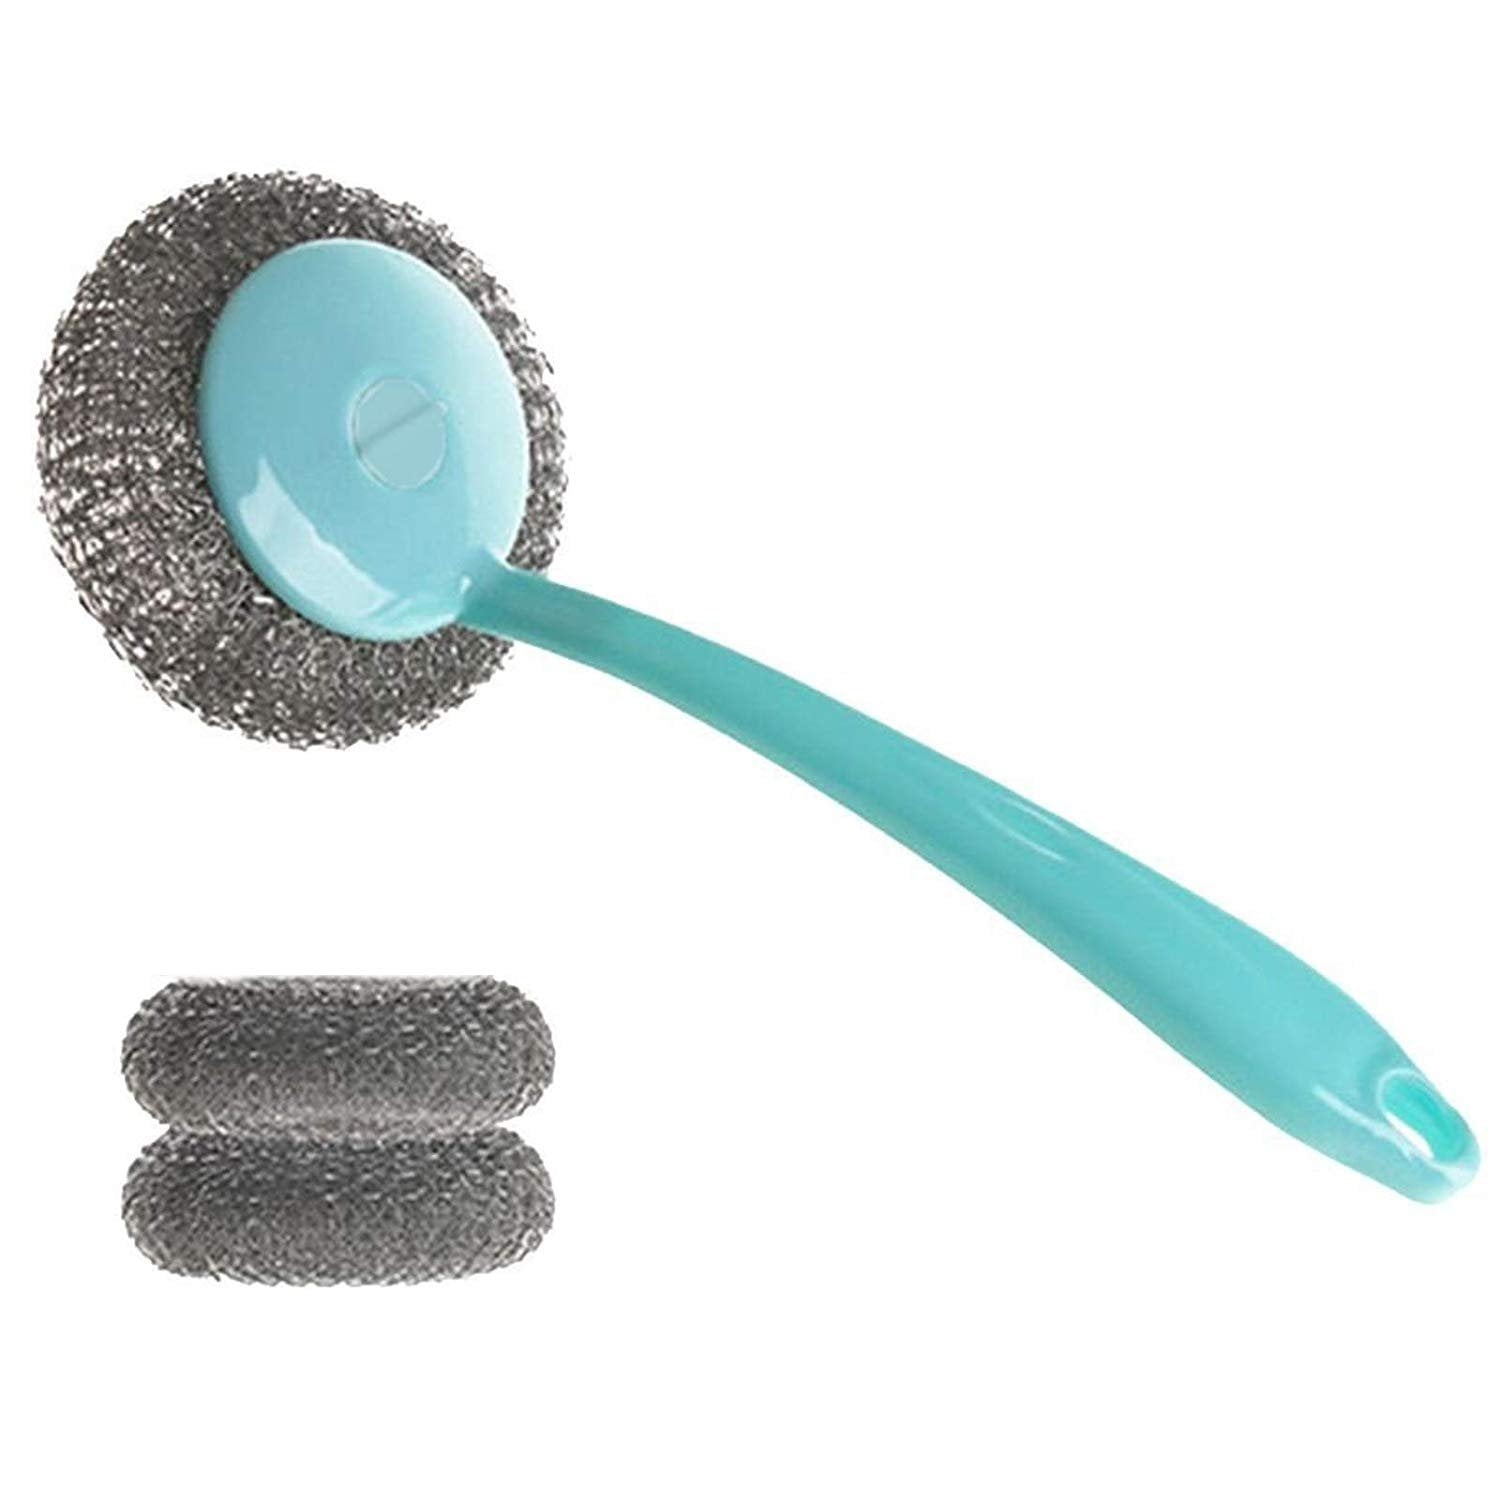 Wideskall Kitchen Cleaning Stainless Steel Sponge with Handle Scouring Stainless Steel Scrubber With Handle